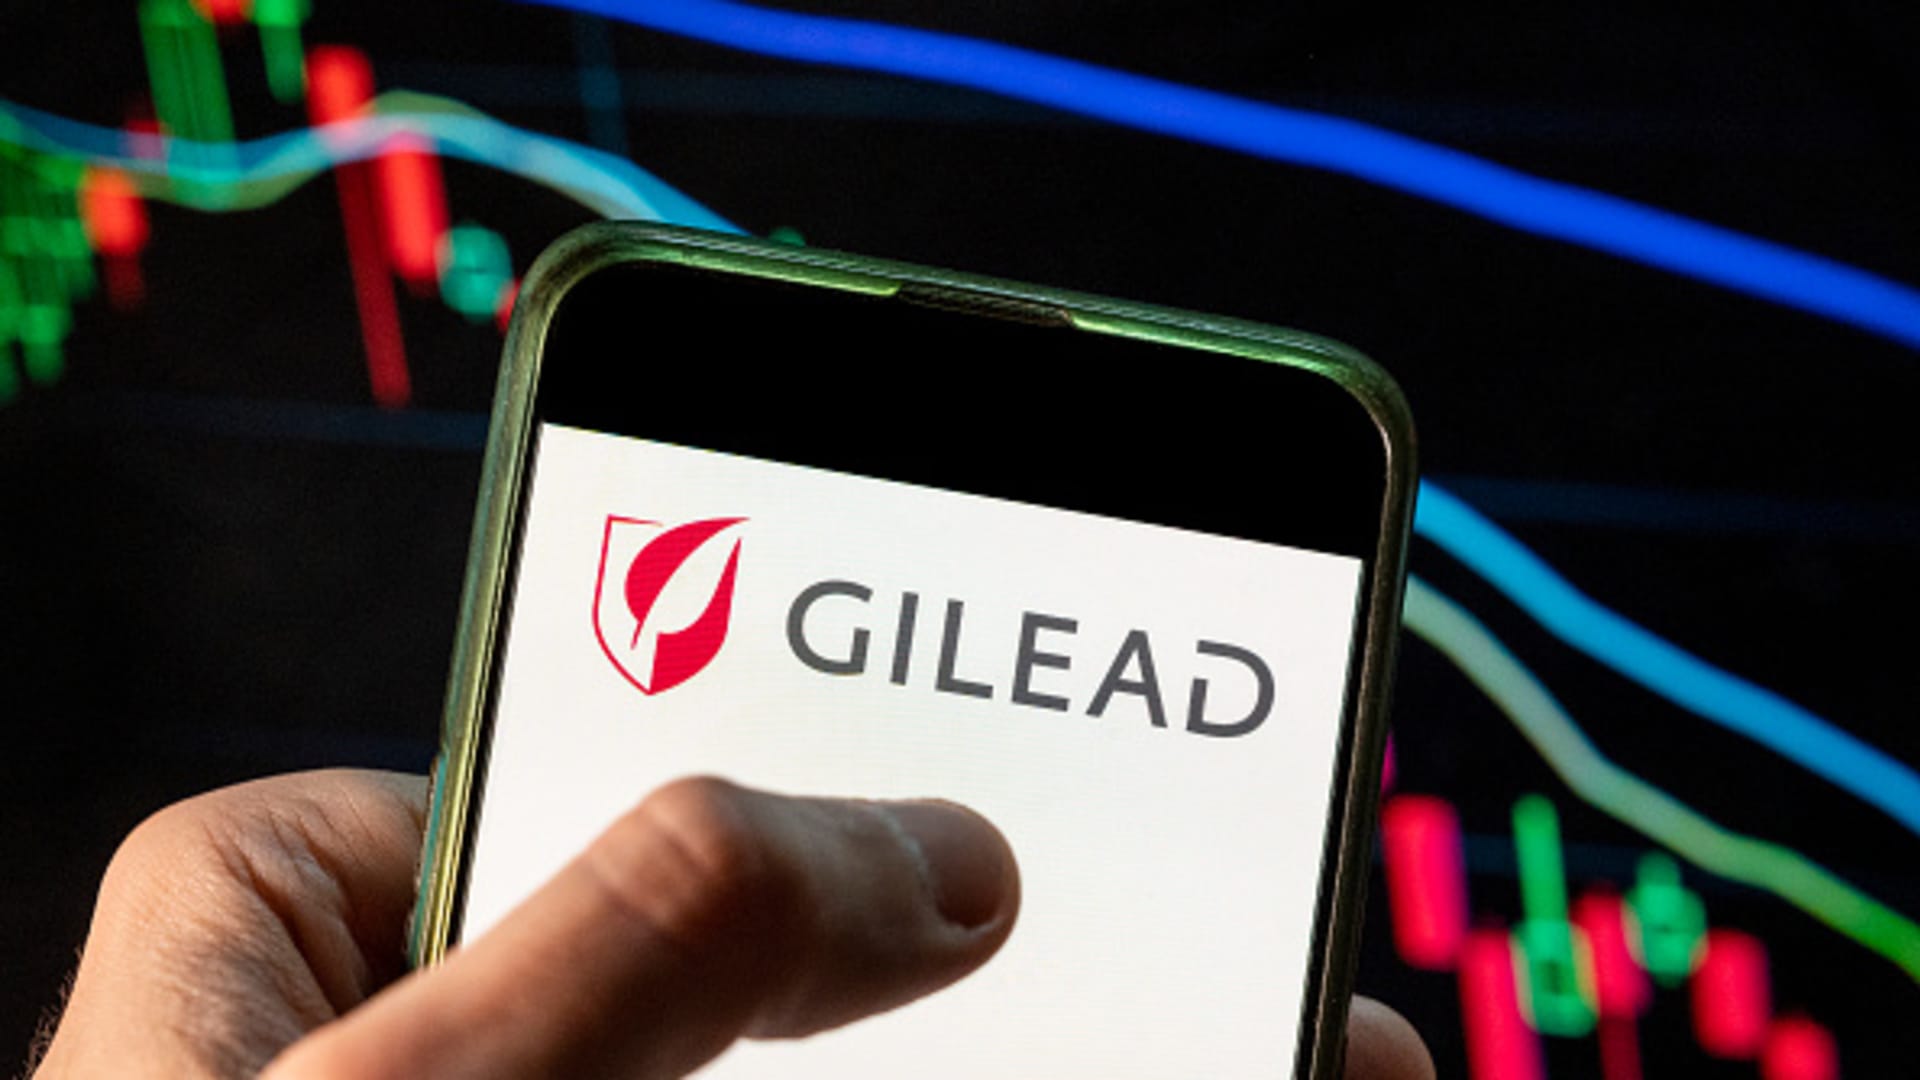 Gilead stock falls after disappointing lung cancer study results